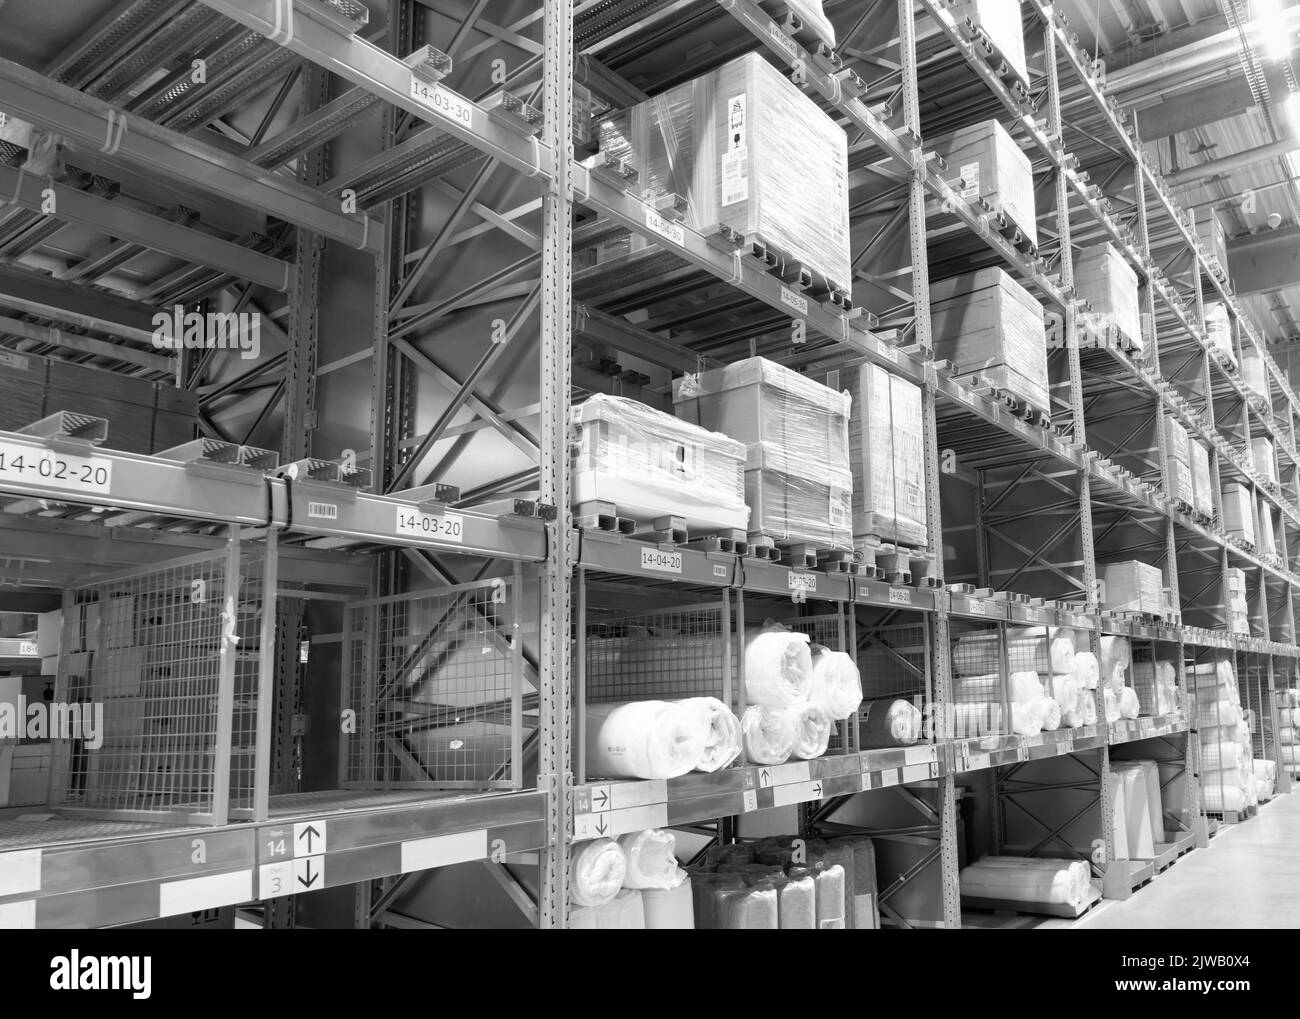 Black and white photo of the interior aisle of a warehouse with goods and boxes Stock Photo